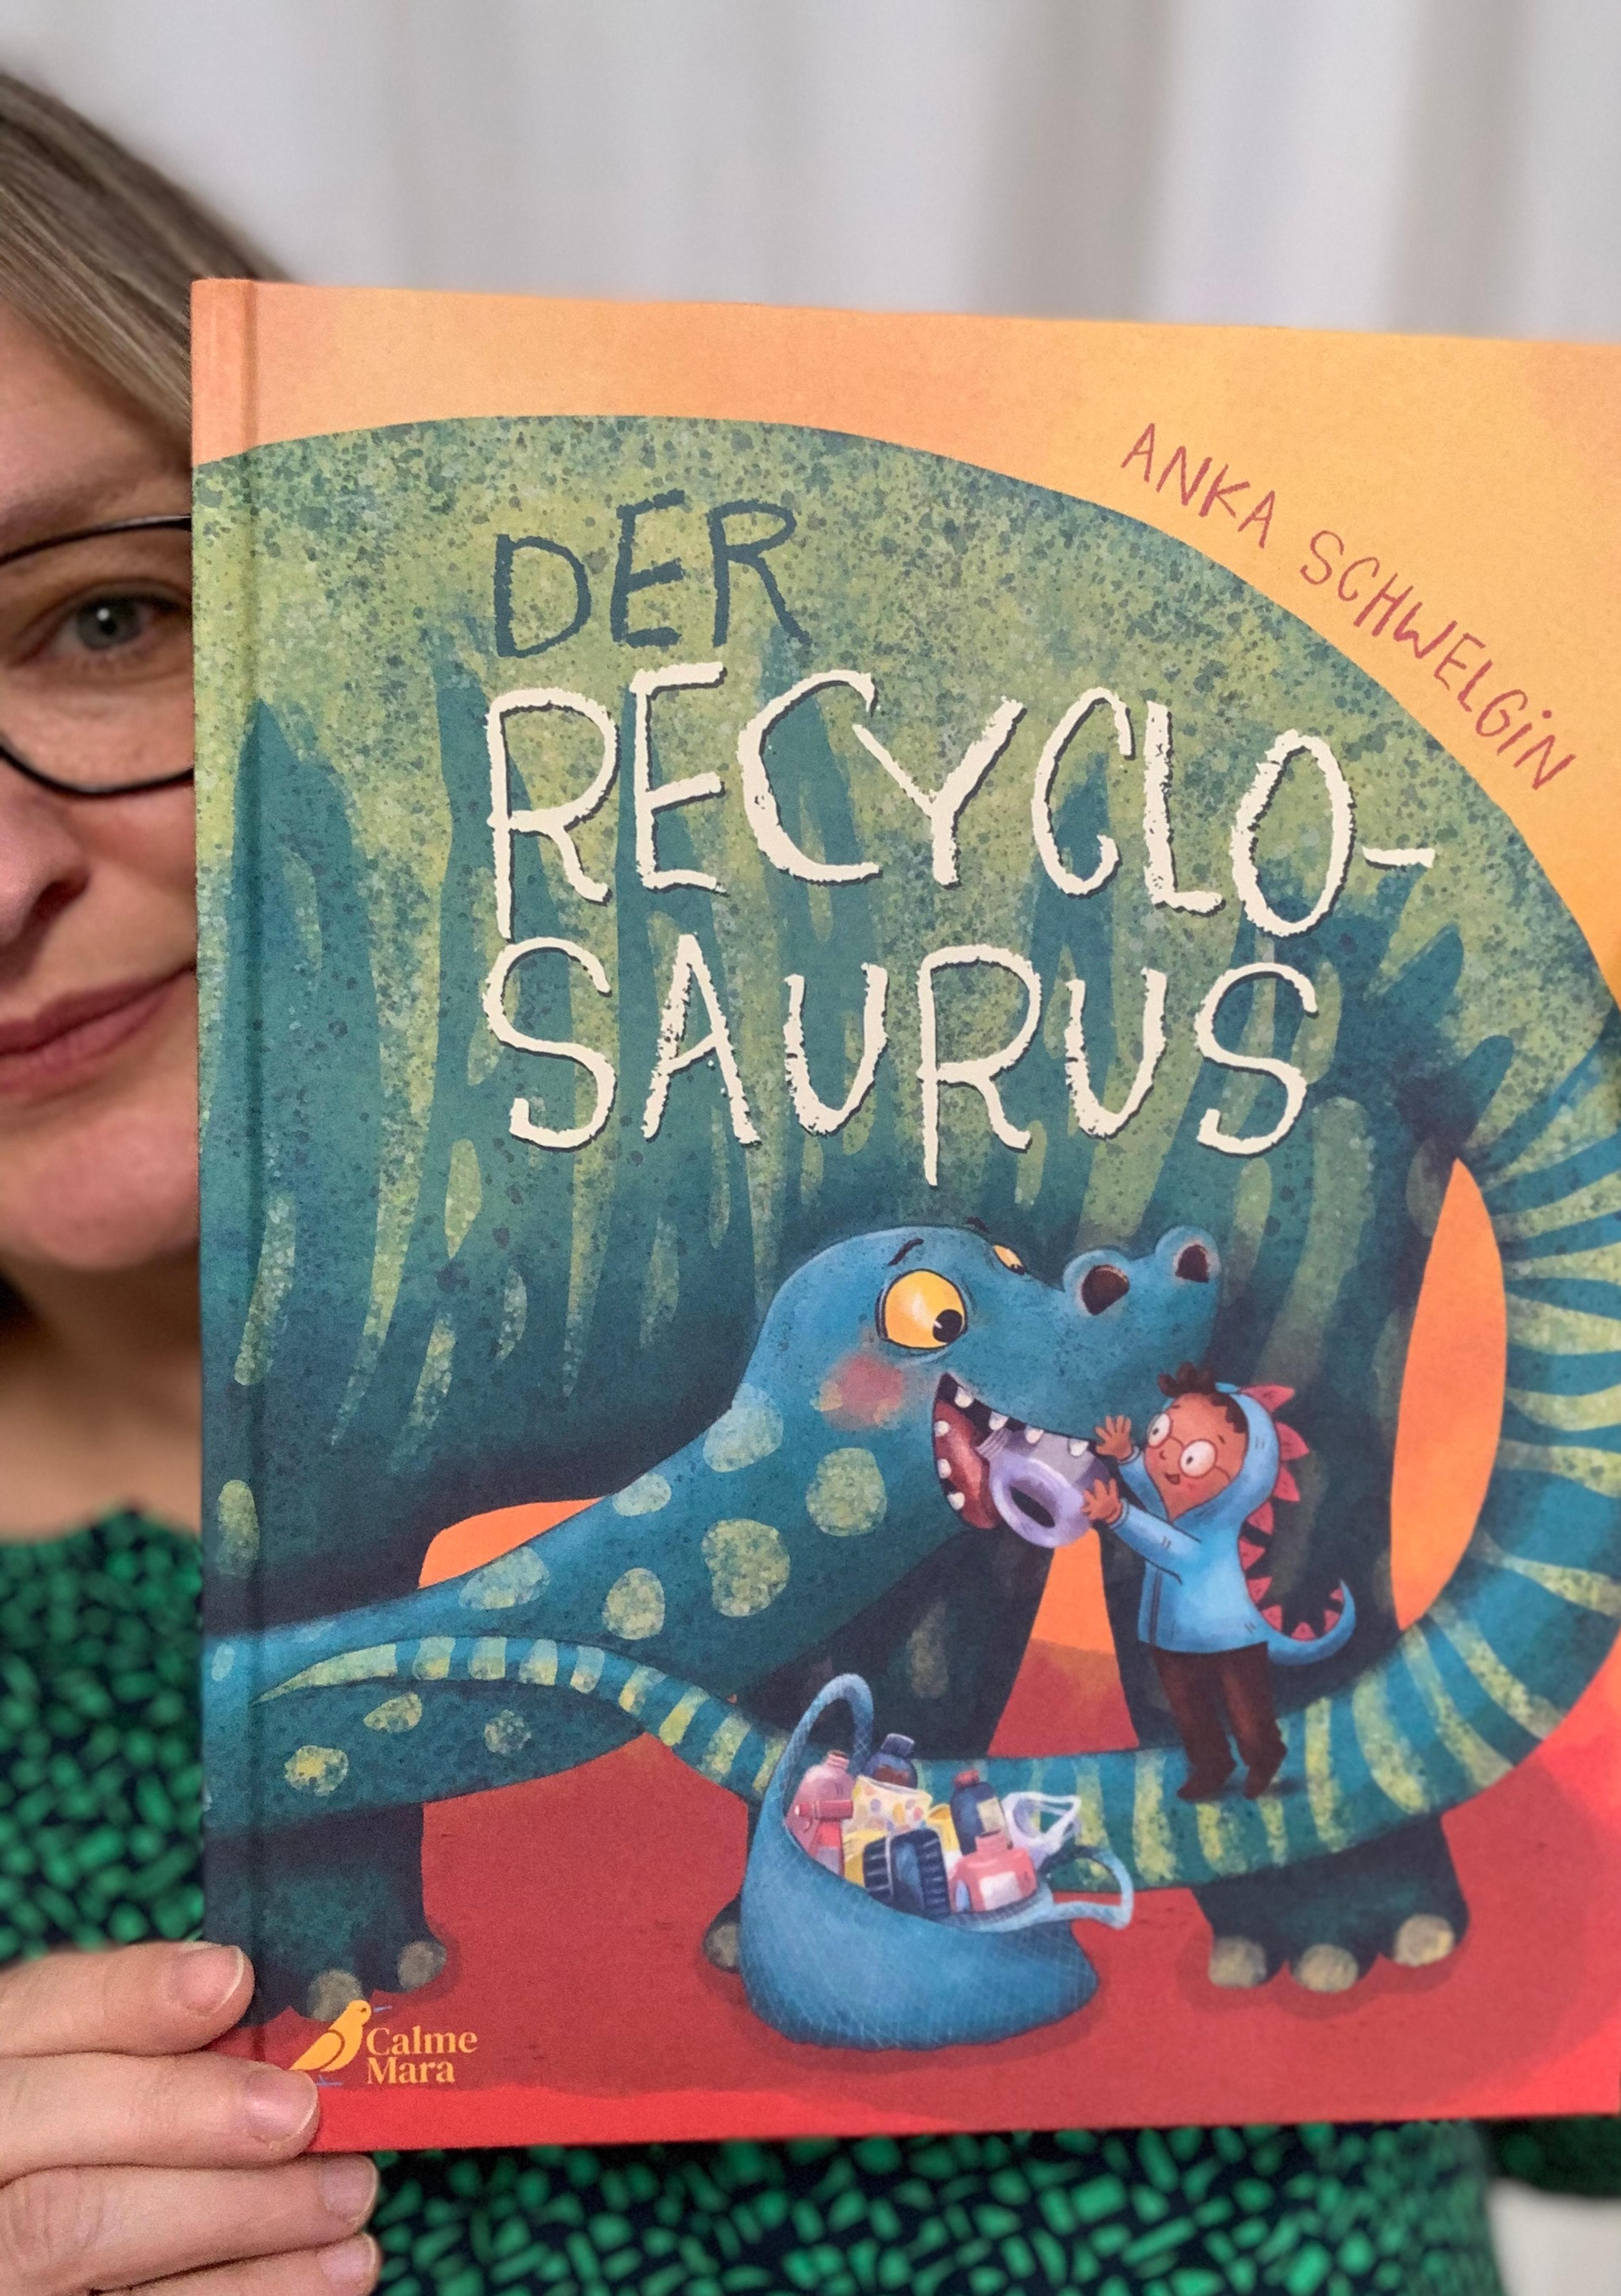 Person holds up a copy of a book 'Der Recyclosaurus'.